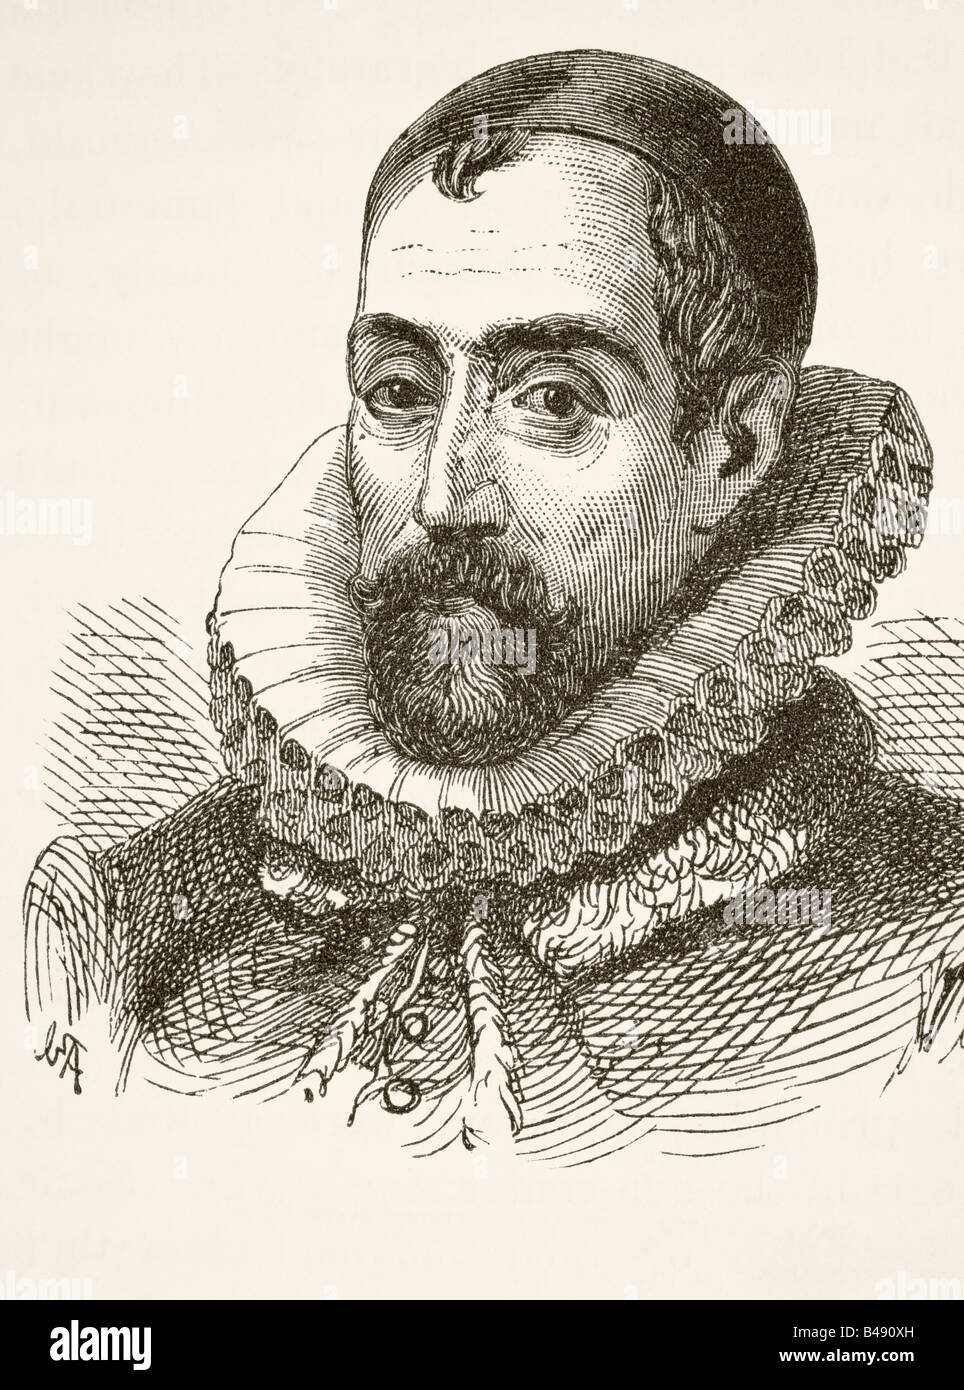 Sir Francis Walsingham,1532 - 1590. English statesman and intelligence chief for Queen Elizabeth I. Stock Photo